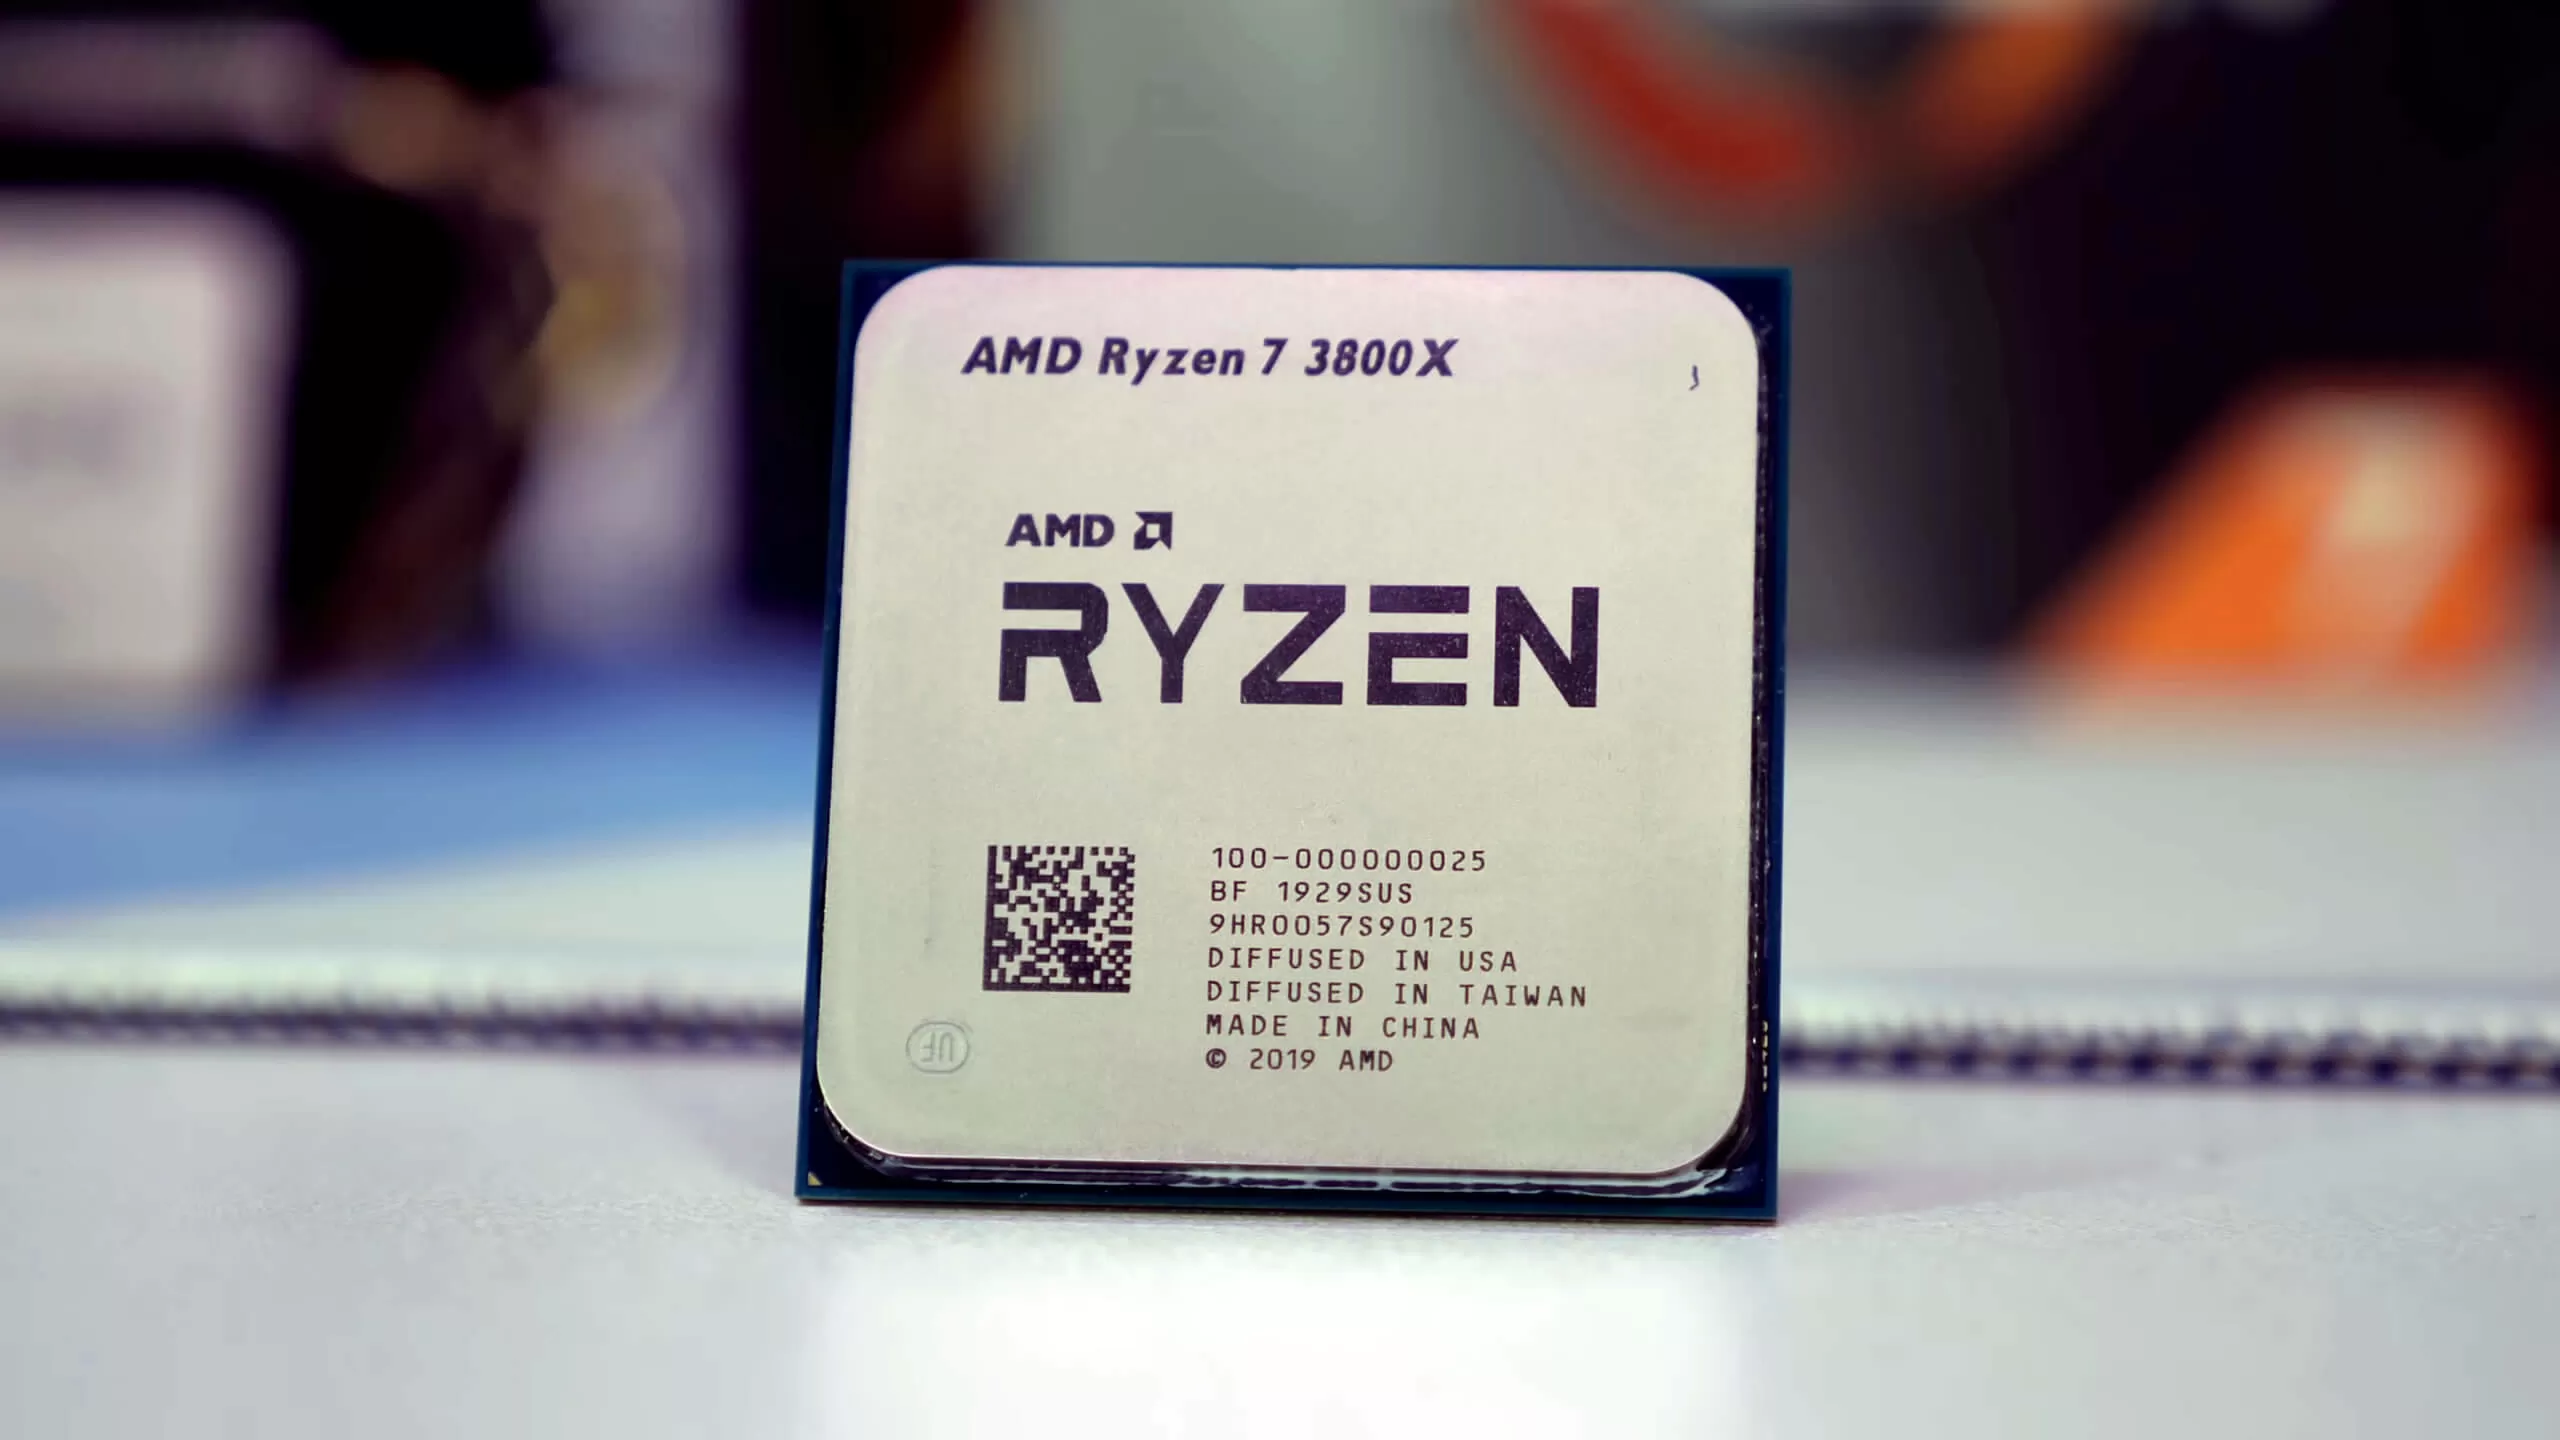 AMD Ryzen 7 3800X vs. 3700X: What's the Difference? | TechSpot